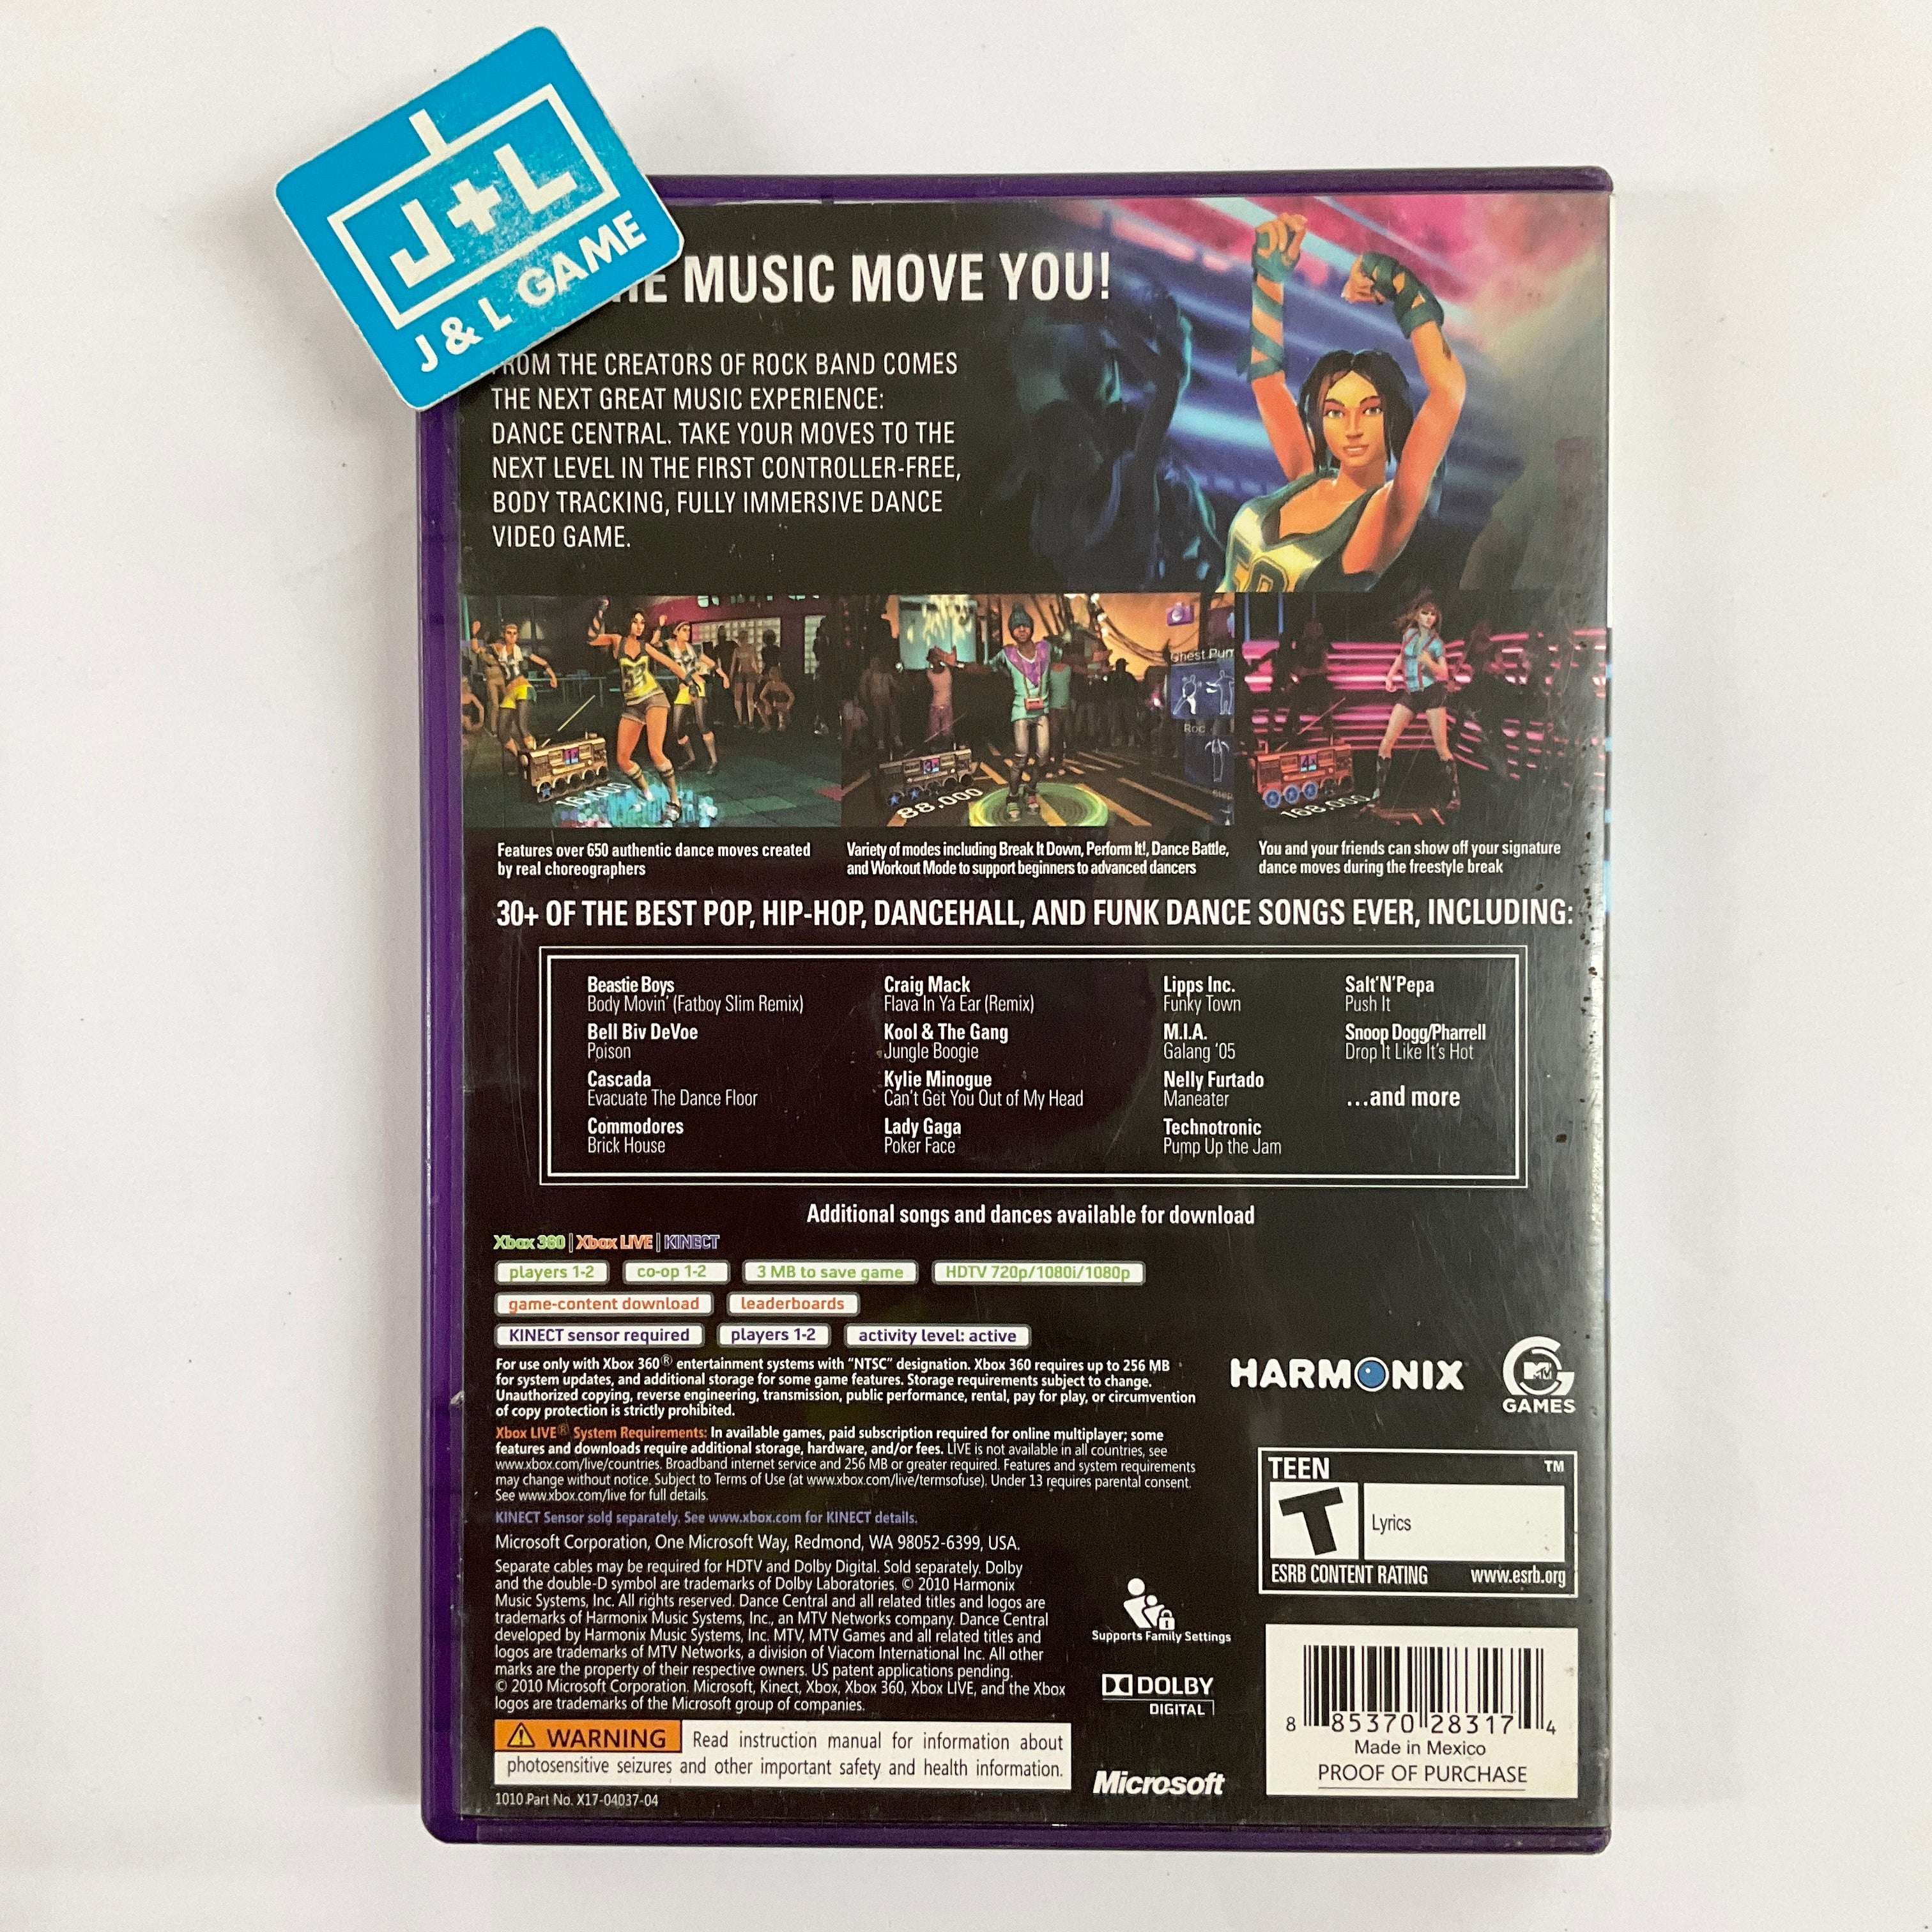 Dance Central (Kinect Required) - Xbox 360 [Pre-Owned] Video Games MTV Games   